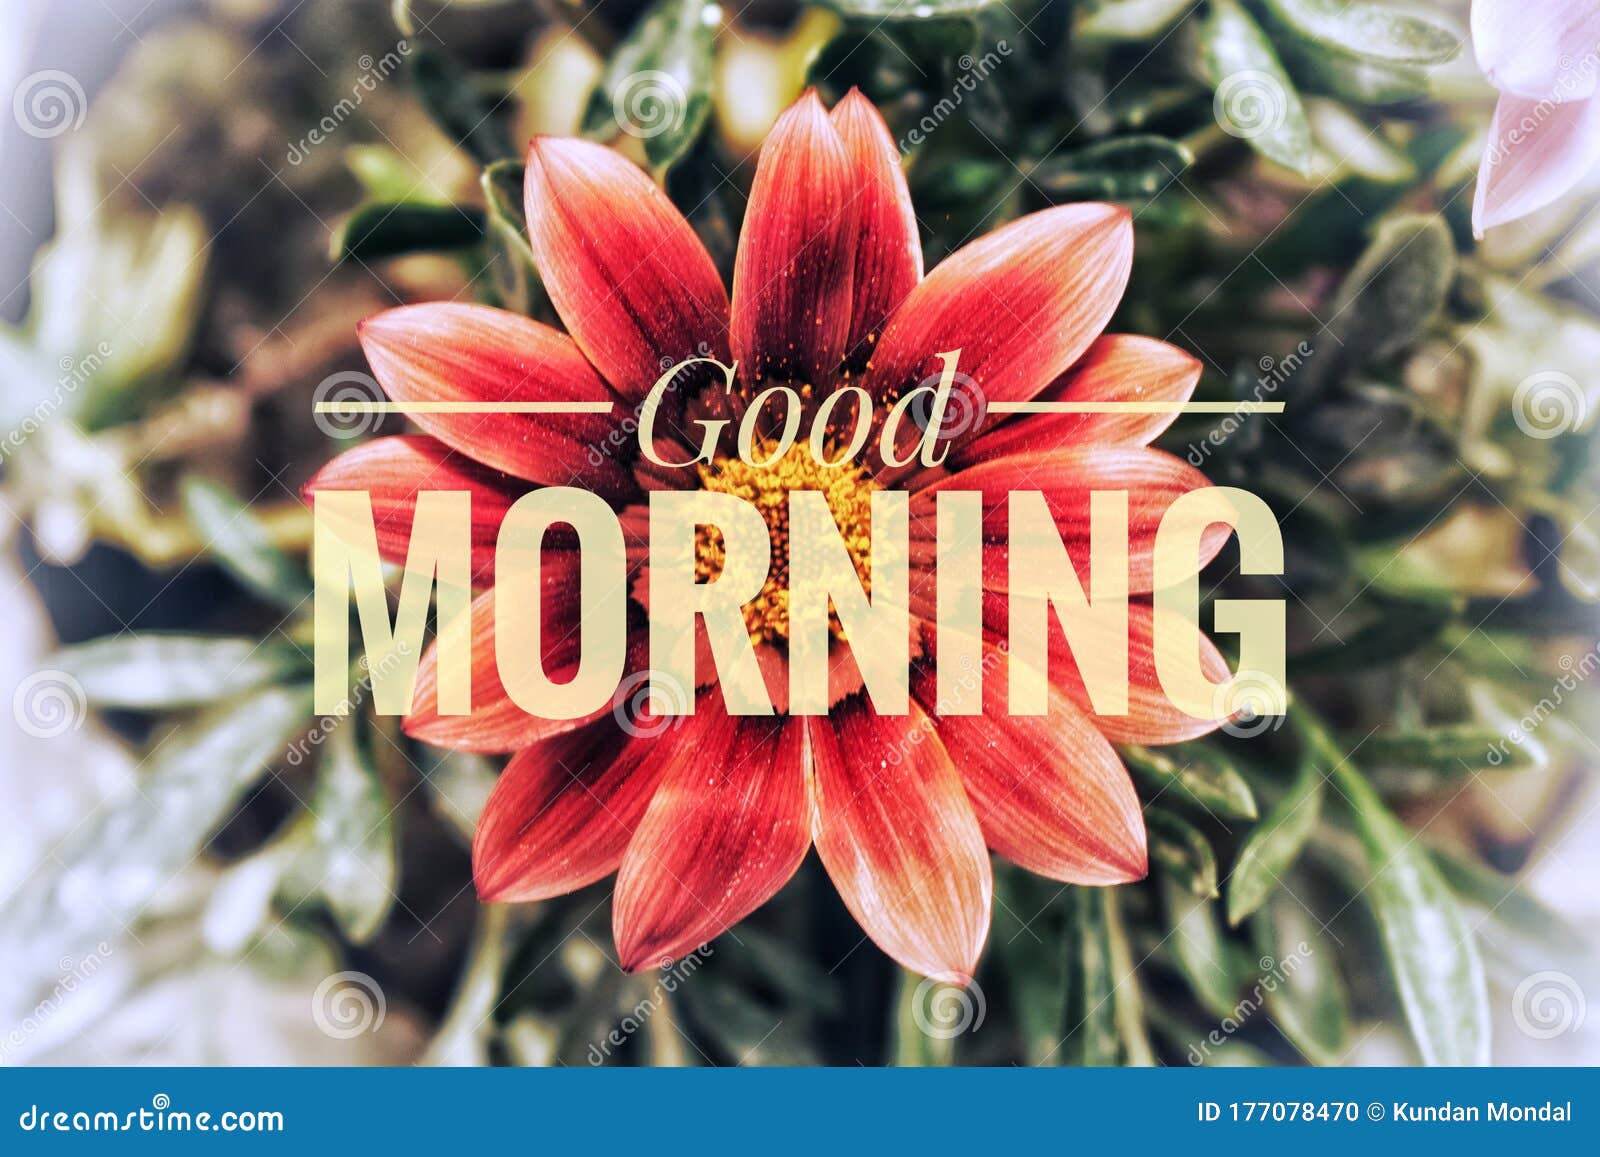 A Good Morning Message To All of Our Friends Stock Photo - Image ...